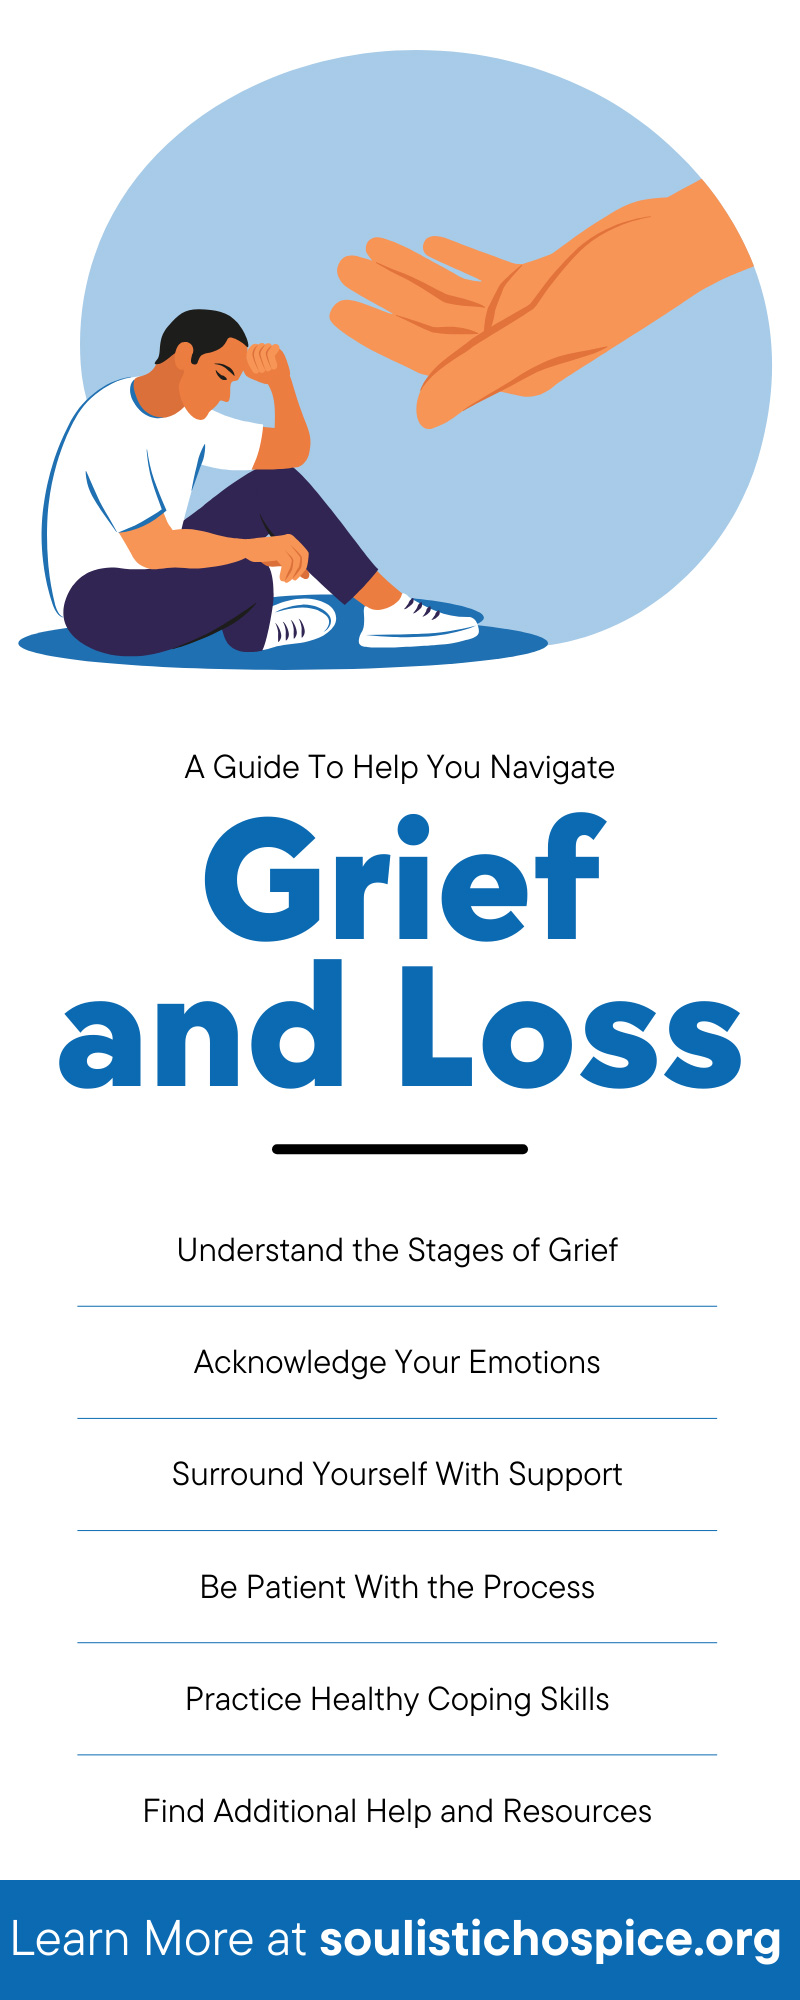 A Guide To Help You Navigate Grief and Loss